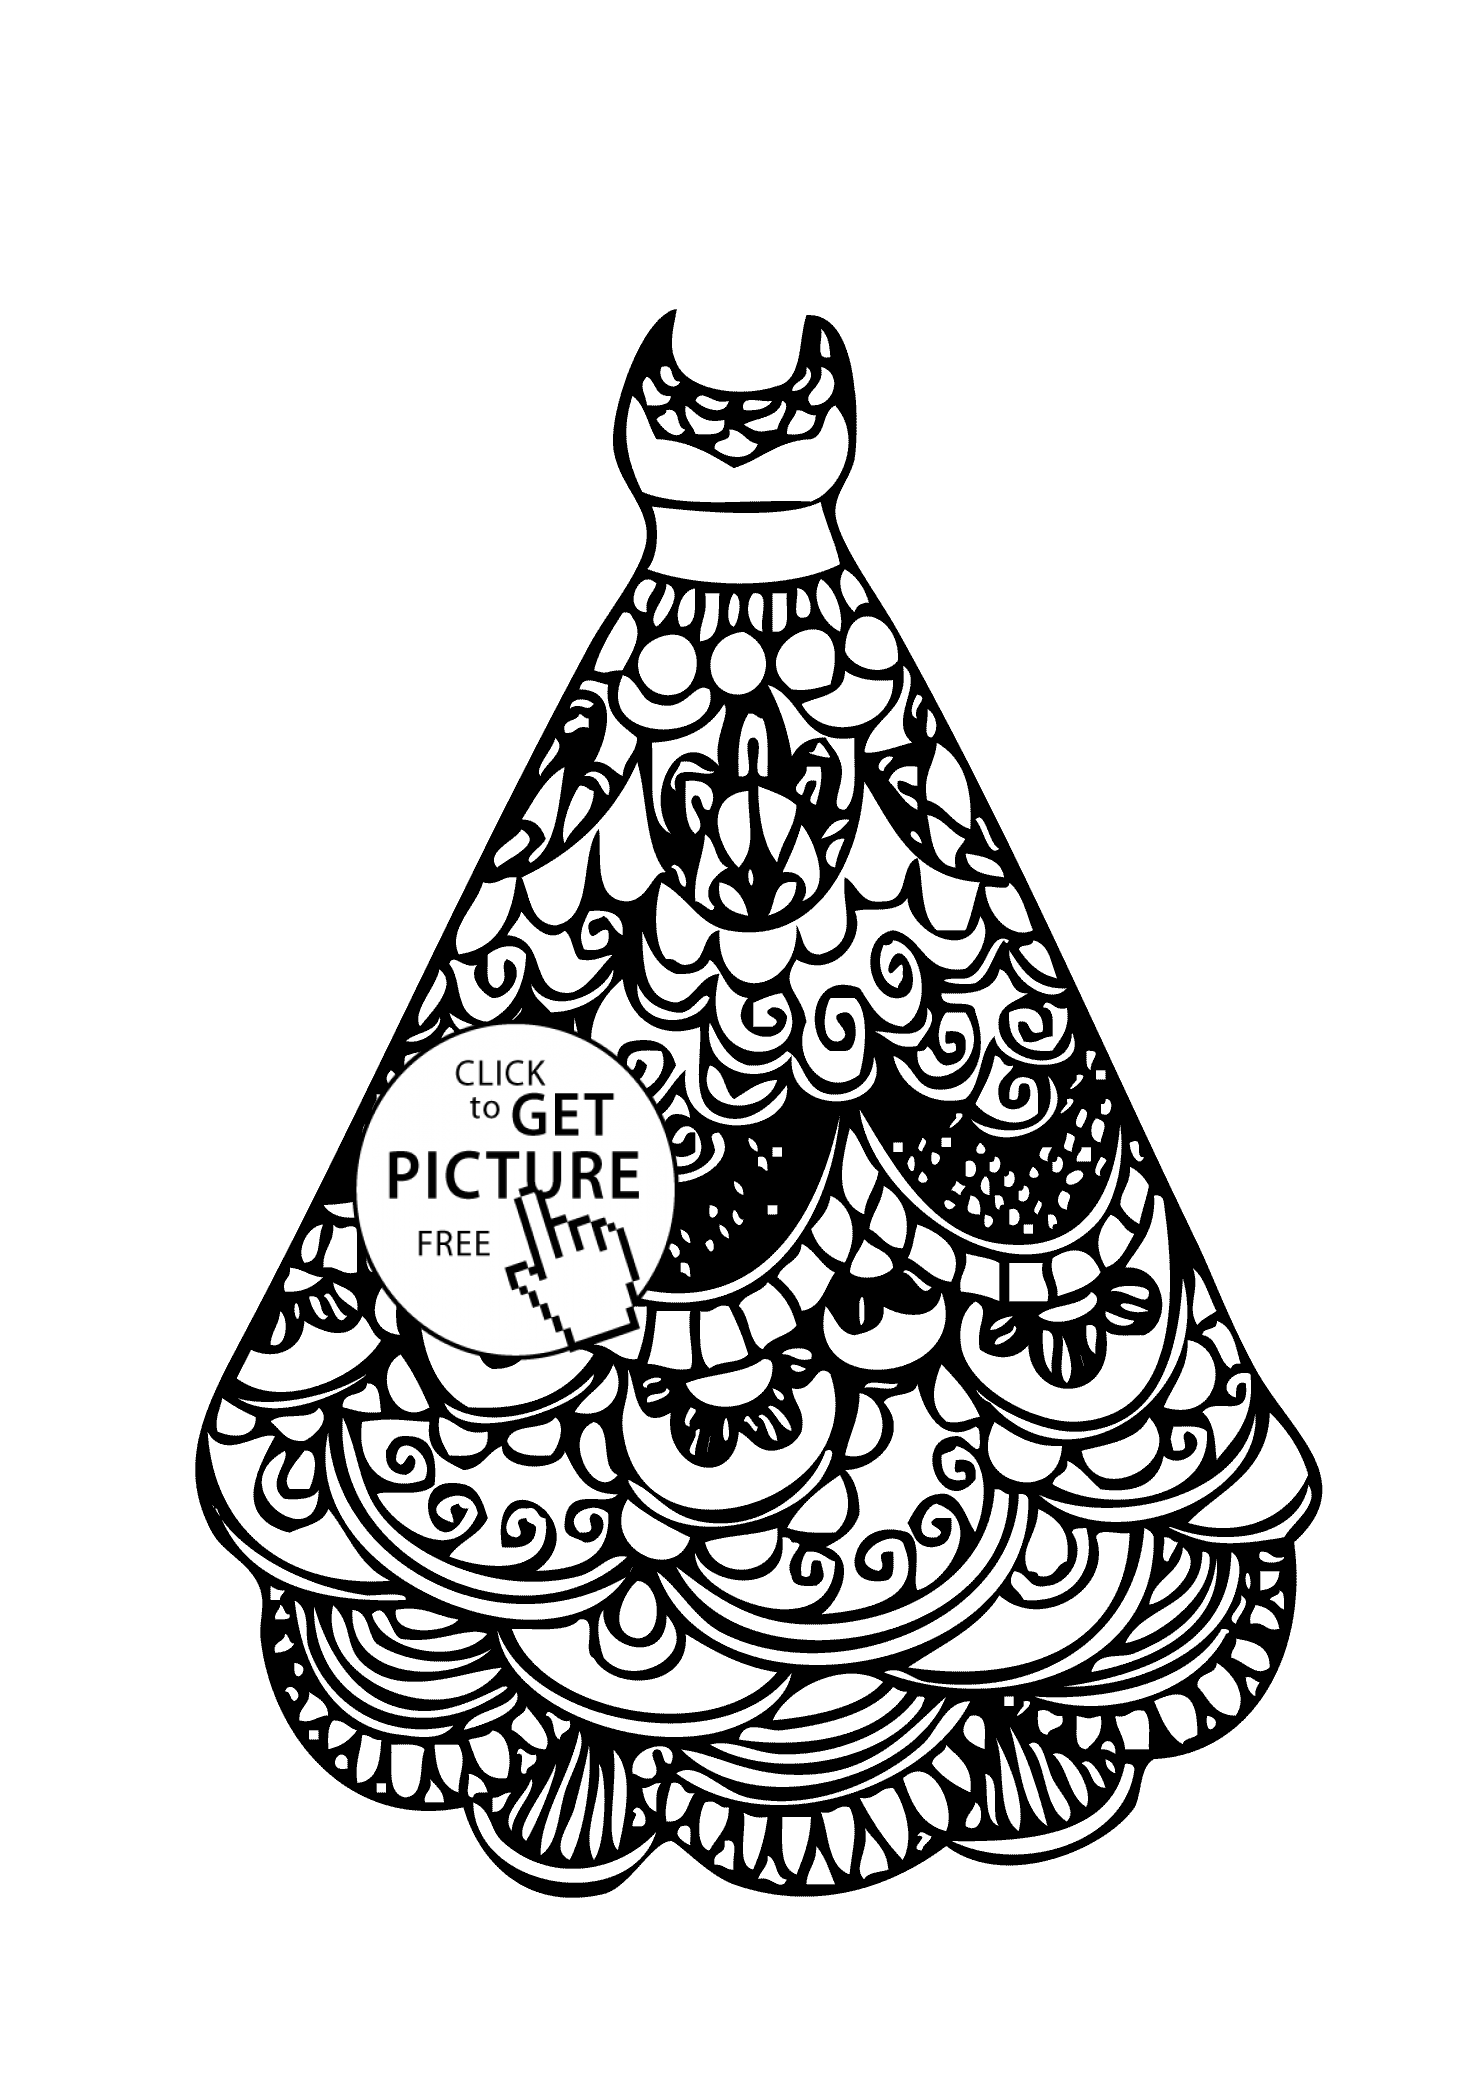 Coloring pages for girls free| printable and online